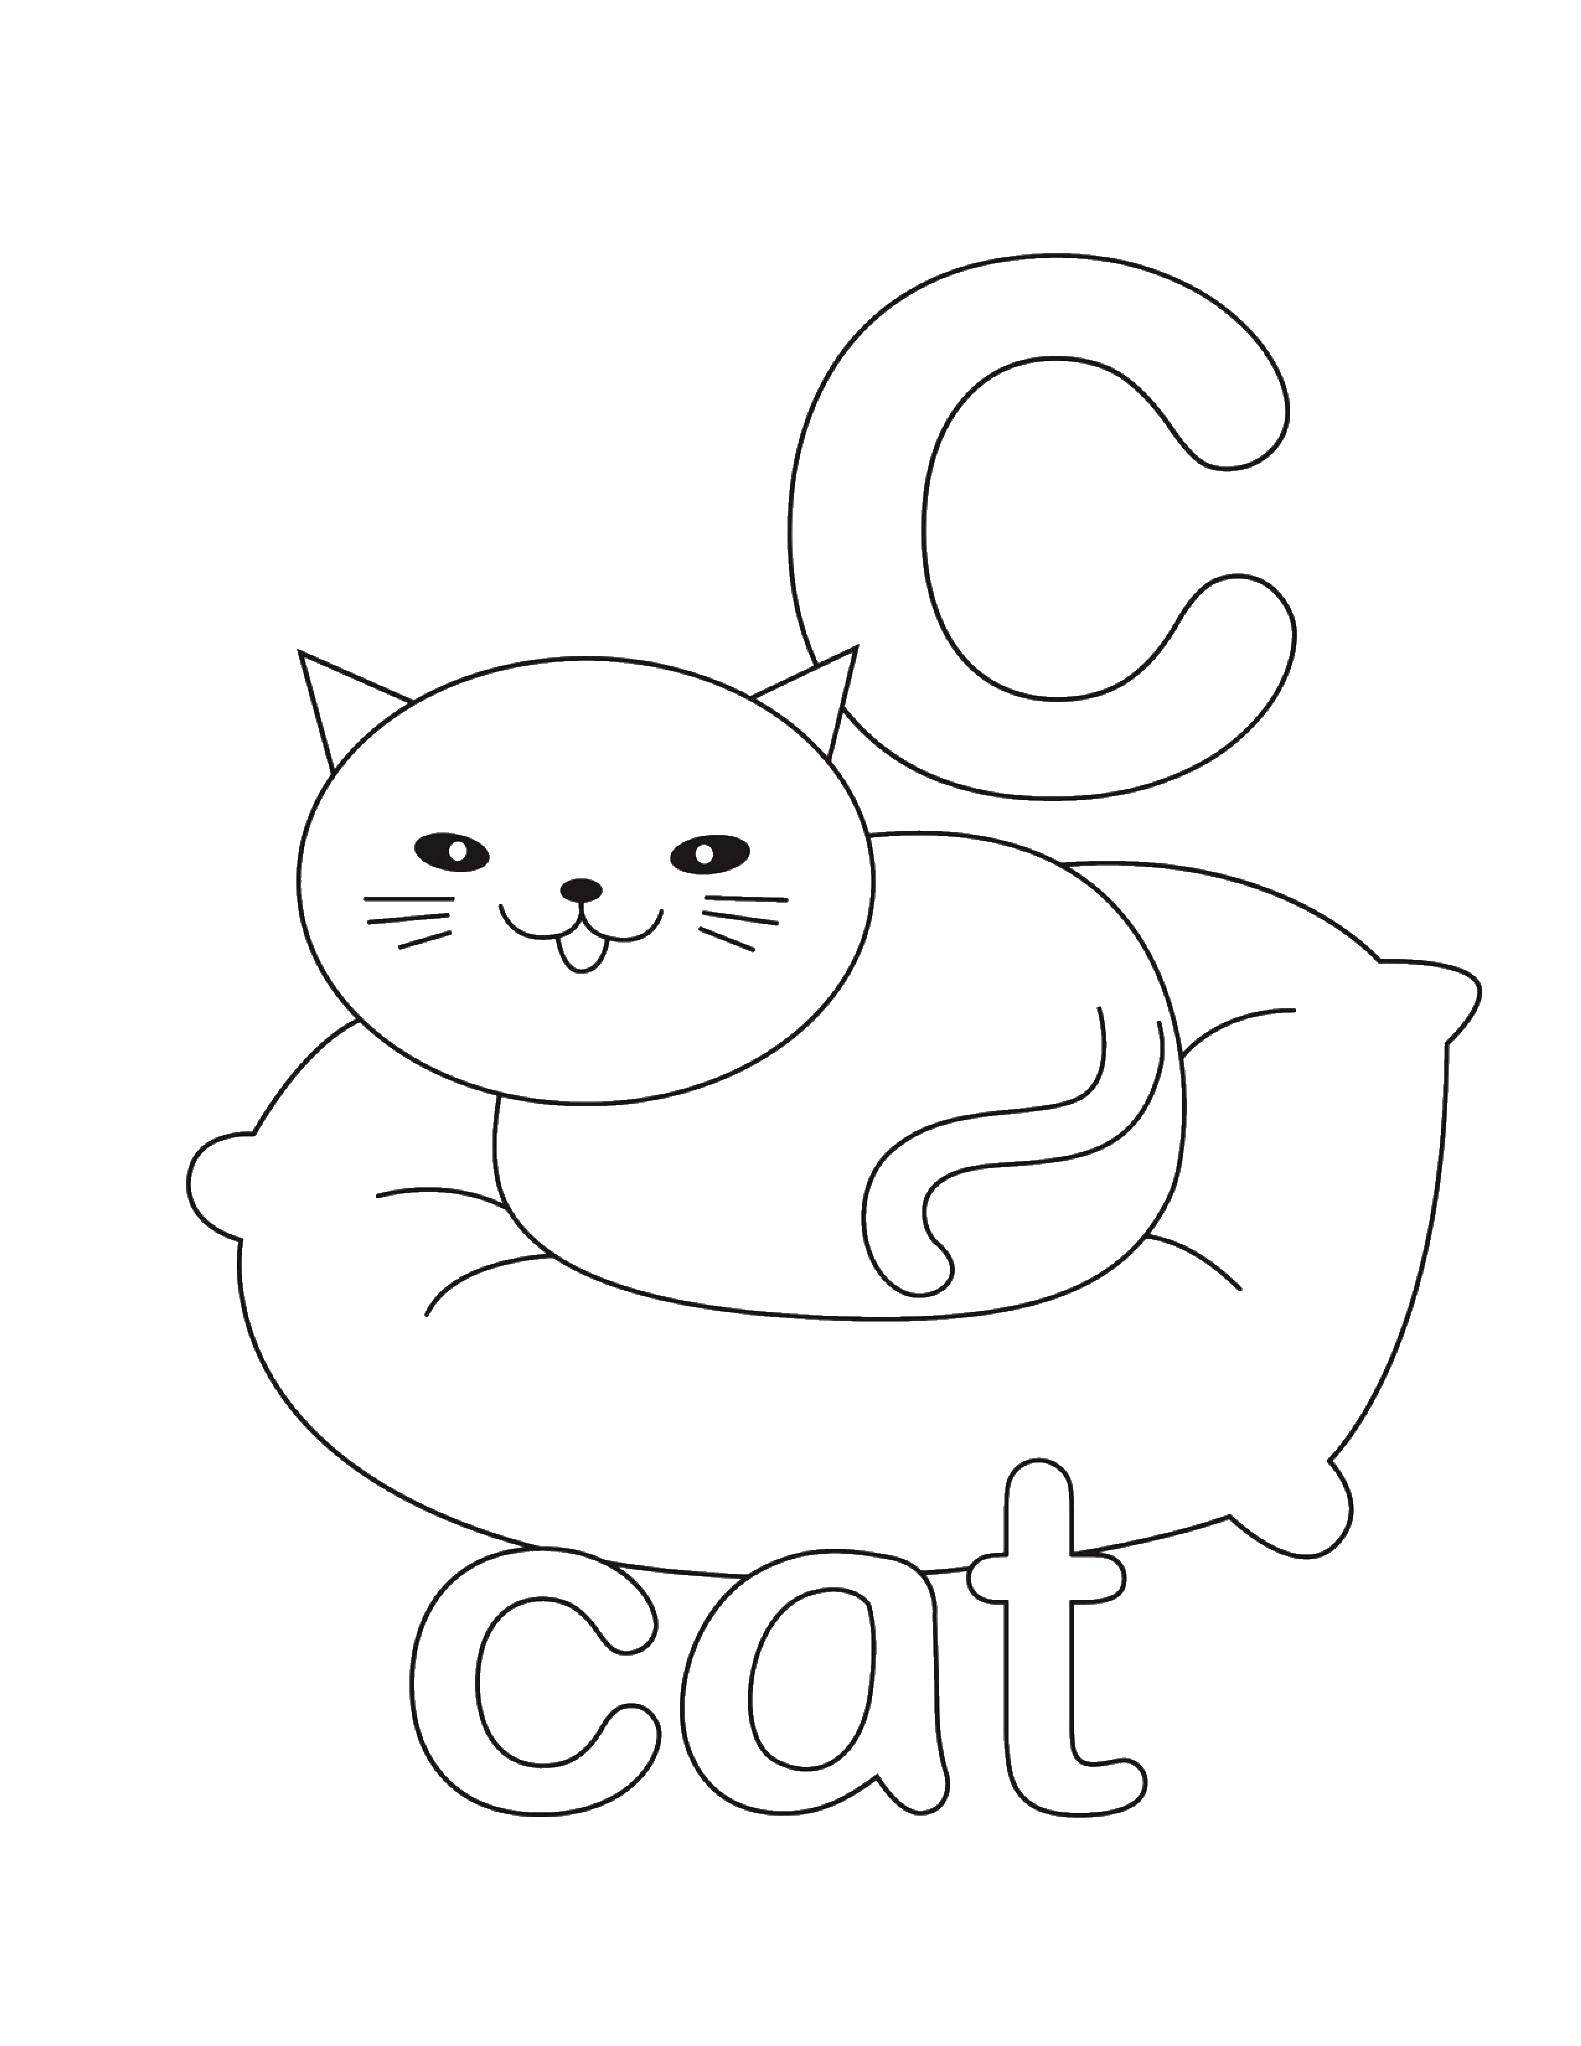 Coloring Cat. Category English words. Tags:  English words, cat.